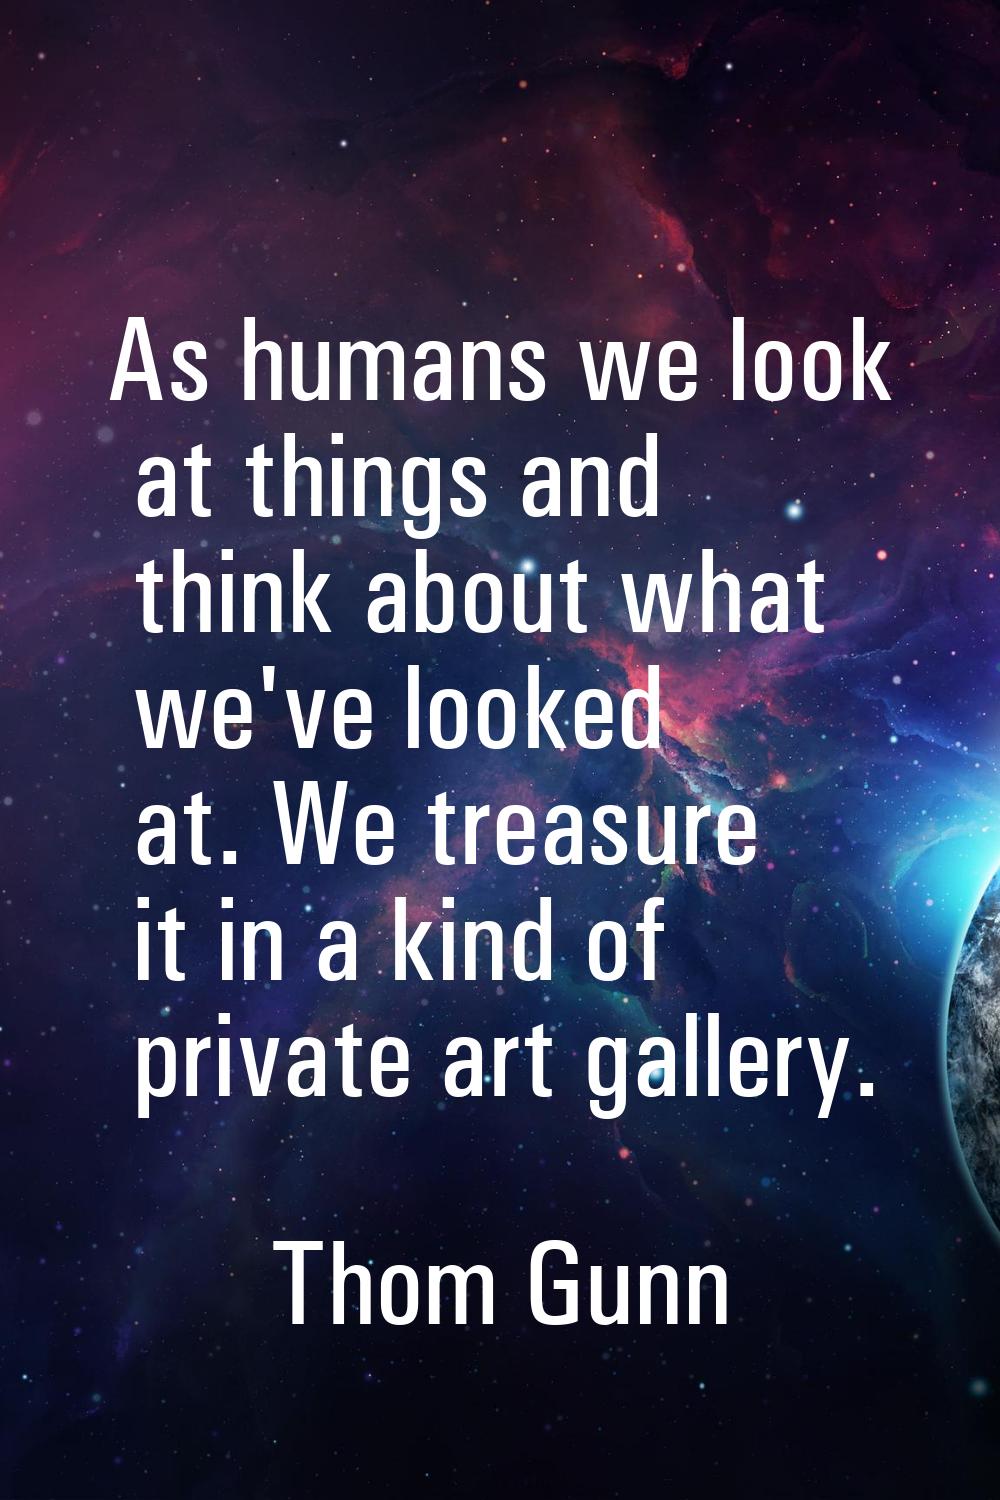 As humans we look at things and think about what we've looked at. We treasure it in a kind of priva